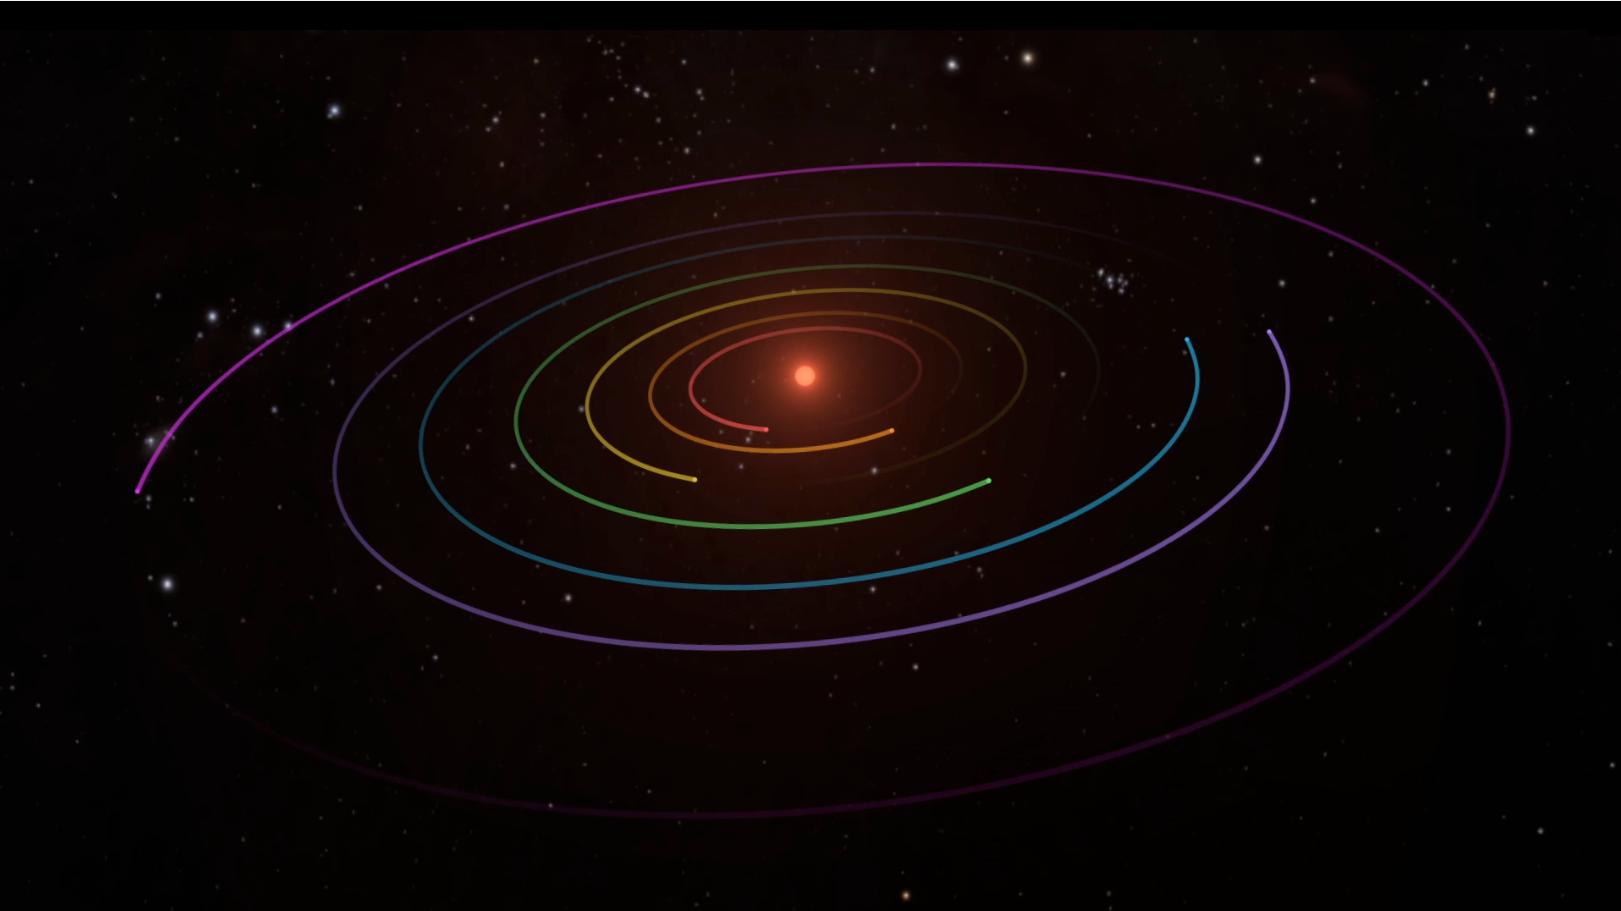 PIA21427: TRAPPIST-1 Planetary Orbits and Transits